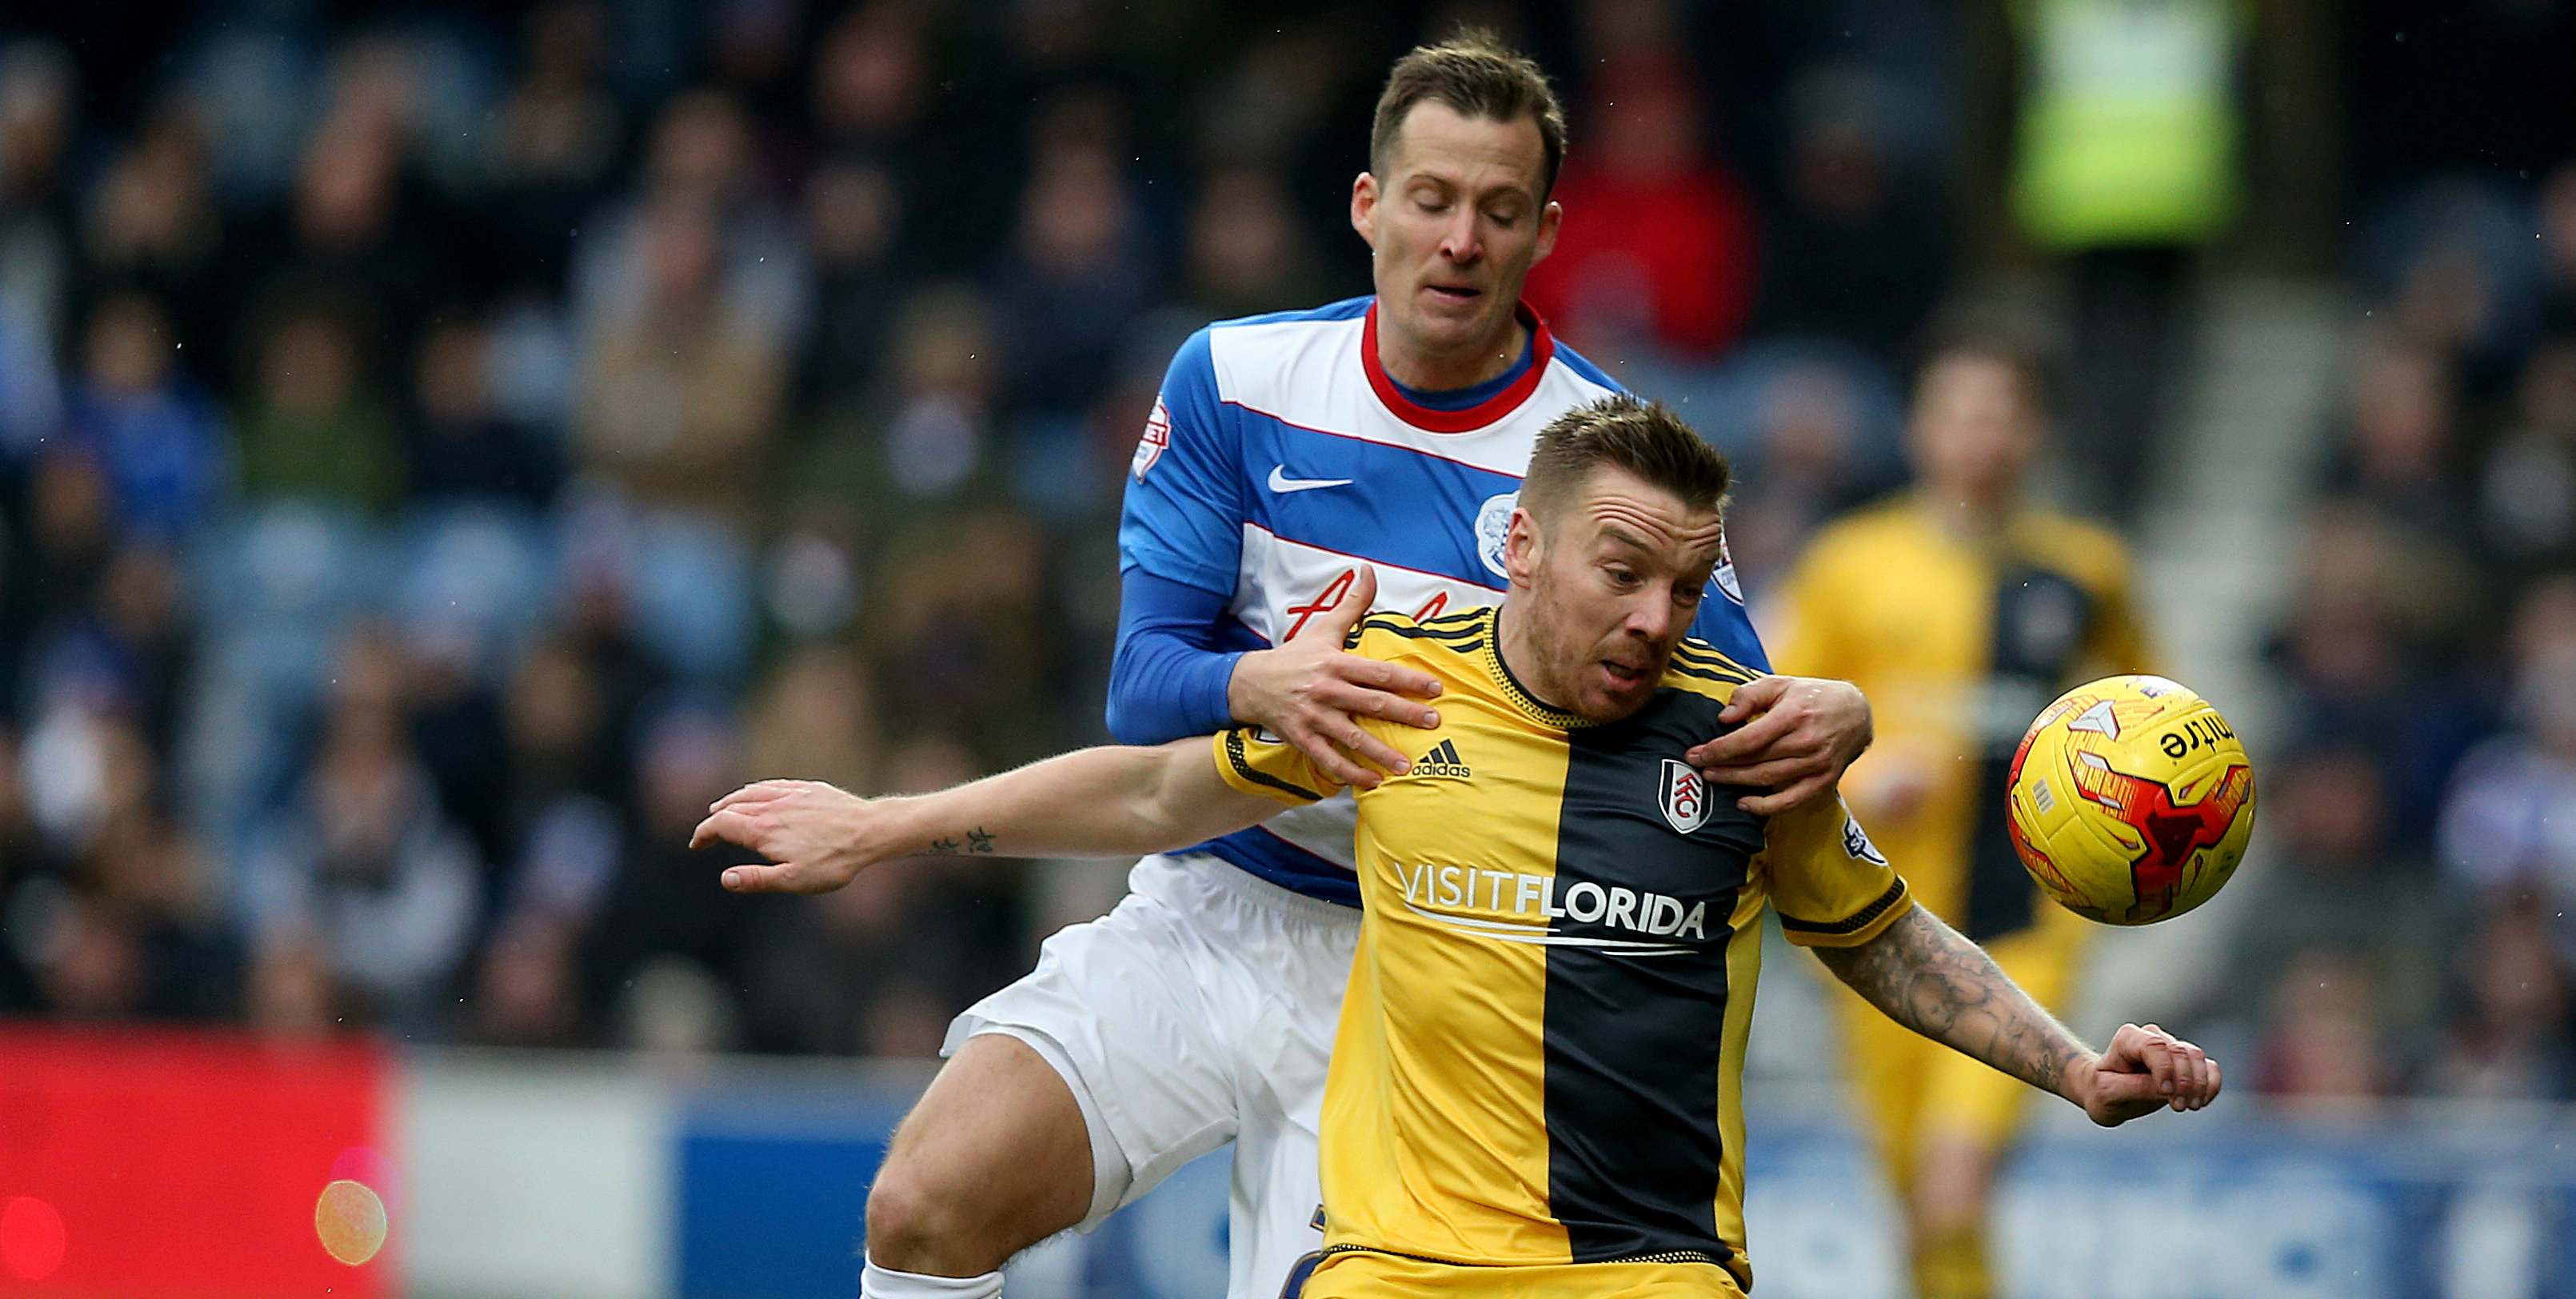 Fulham again embarrassed Rangers in a one-sided derby